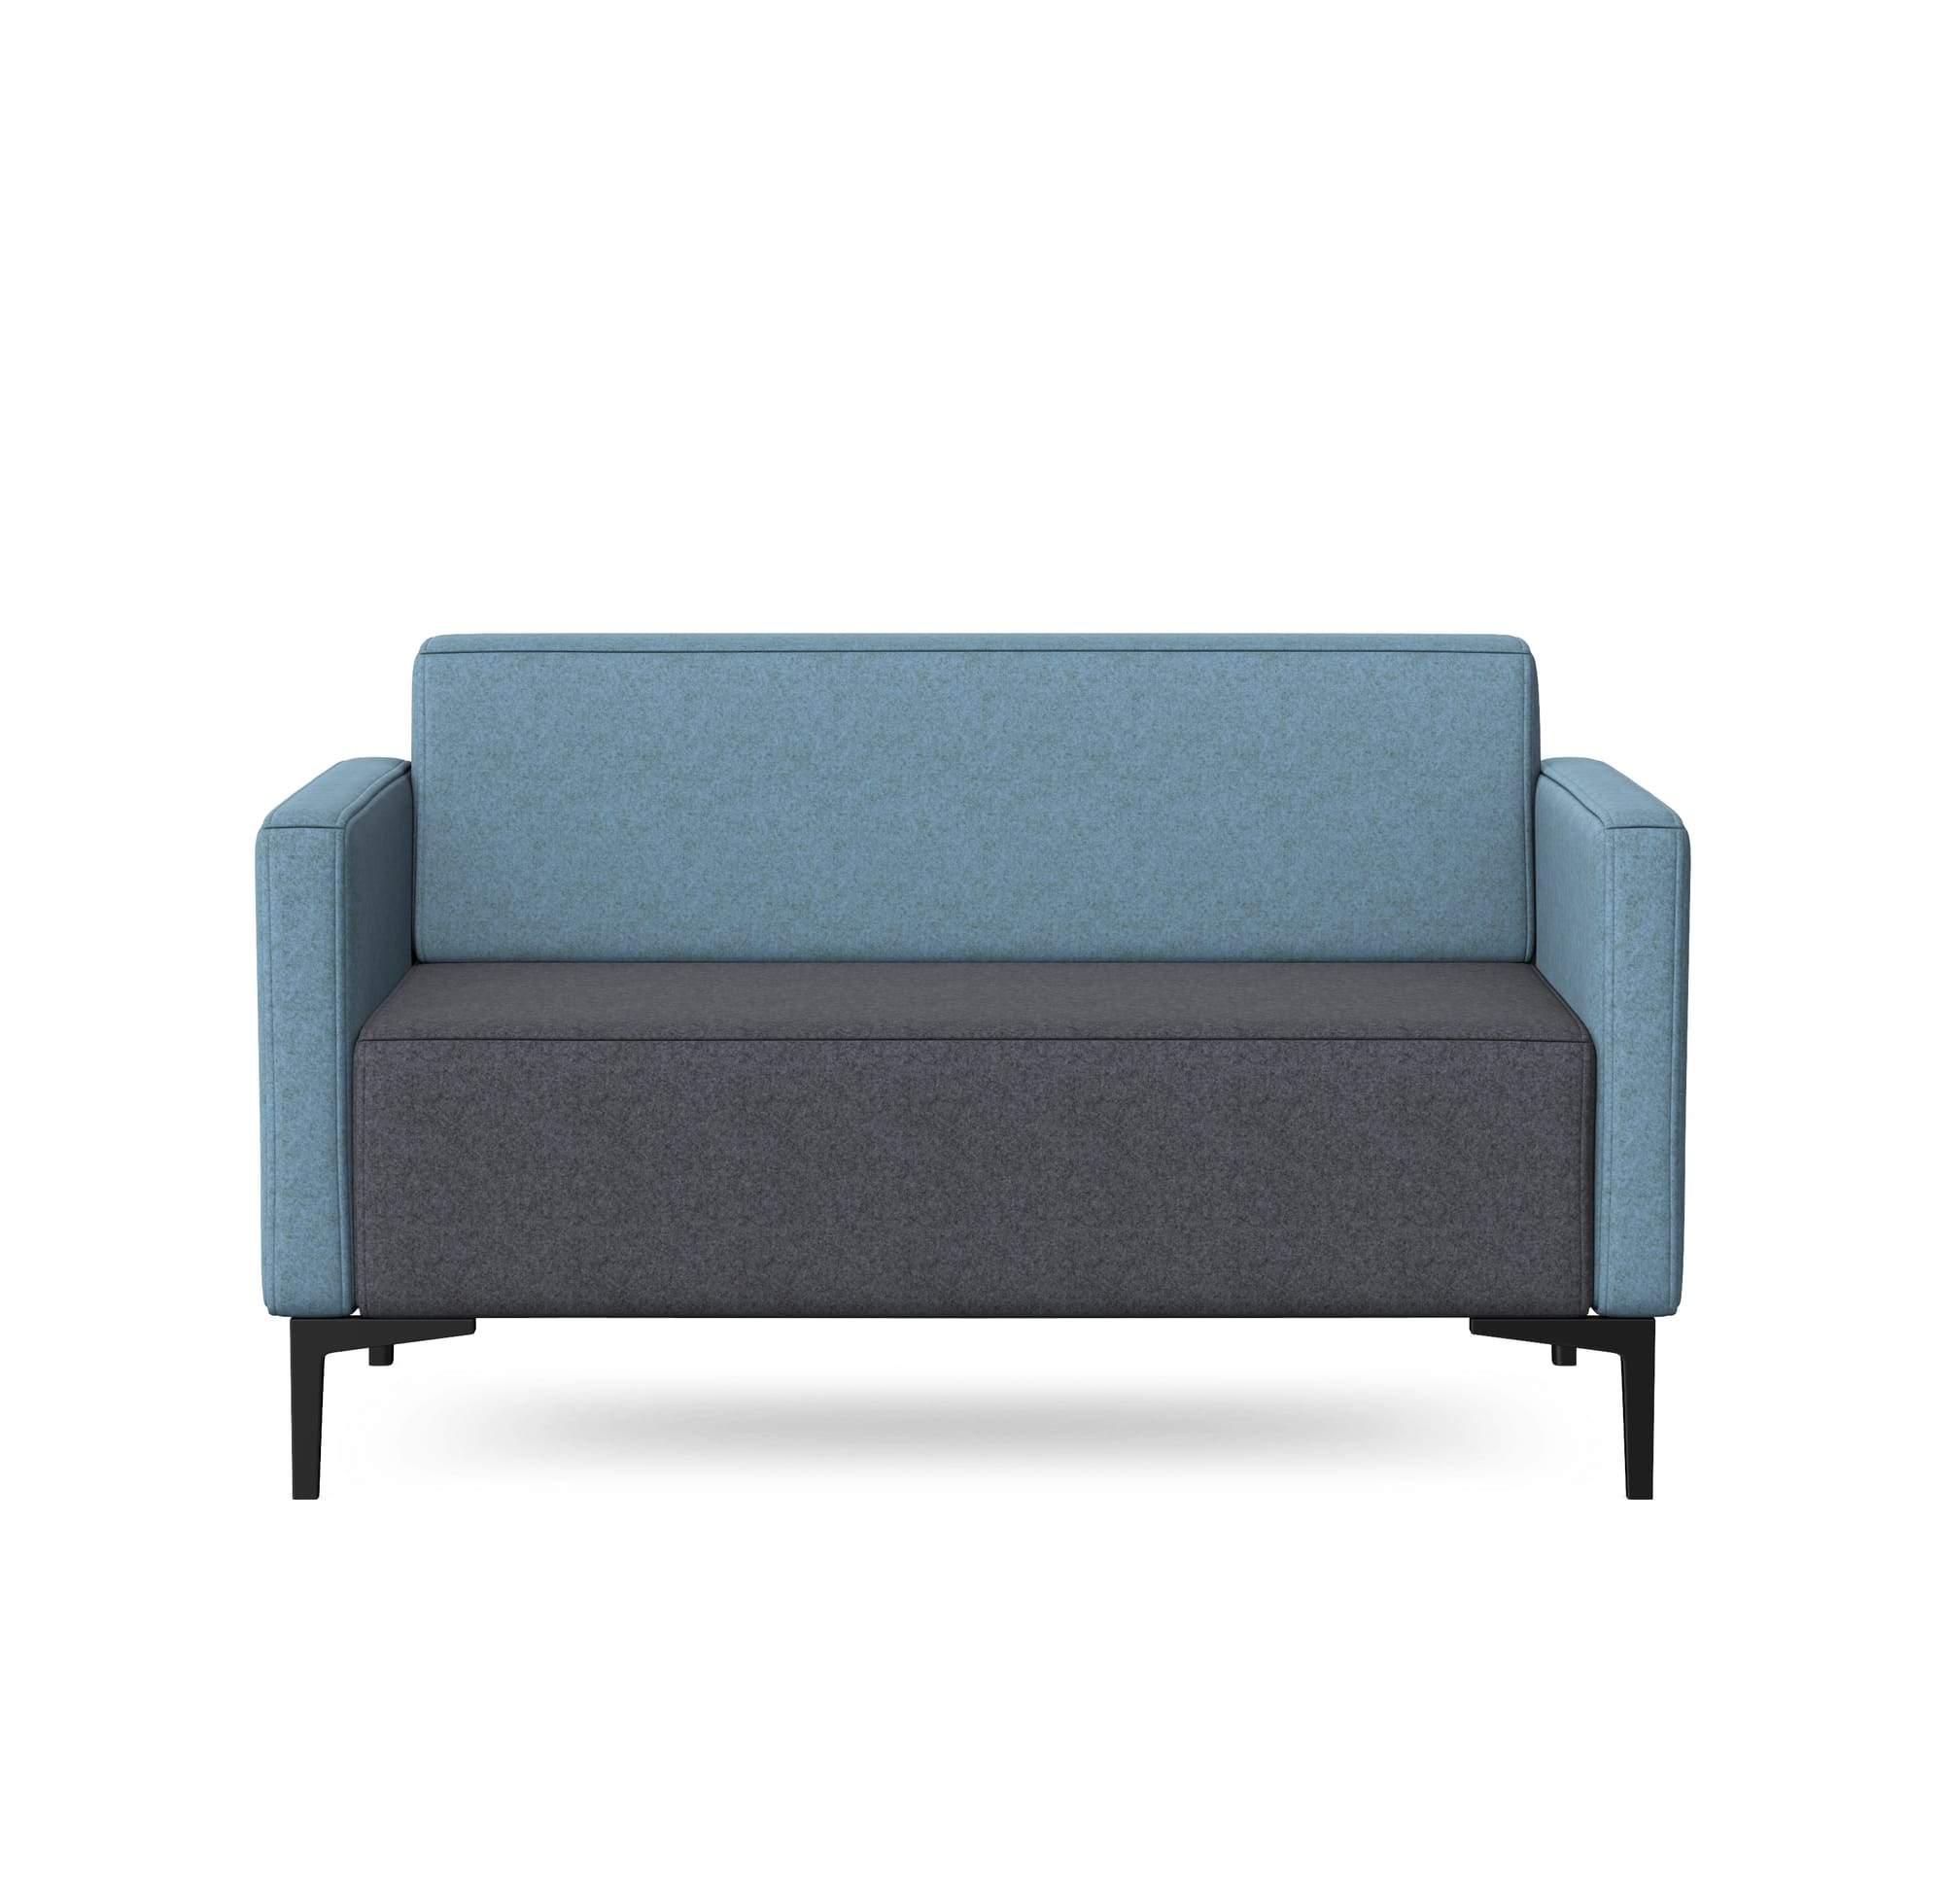 OBAN - Two Seat Sofa with Backrest